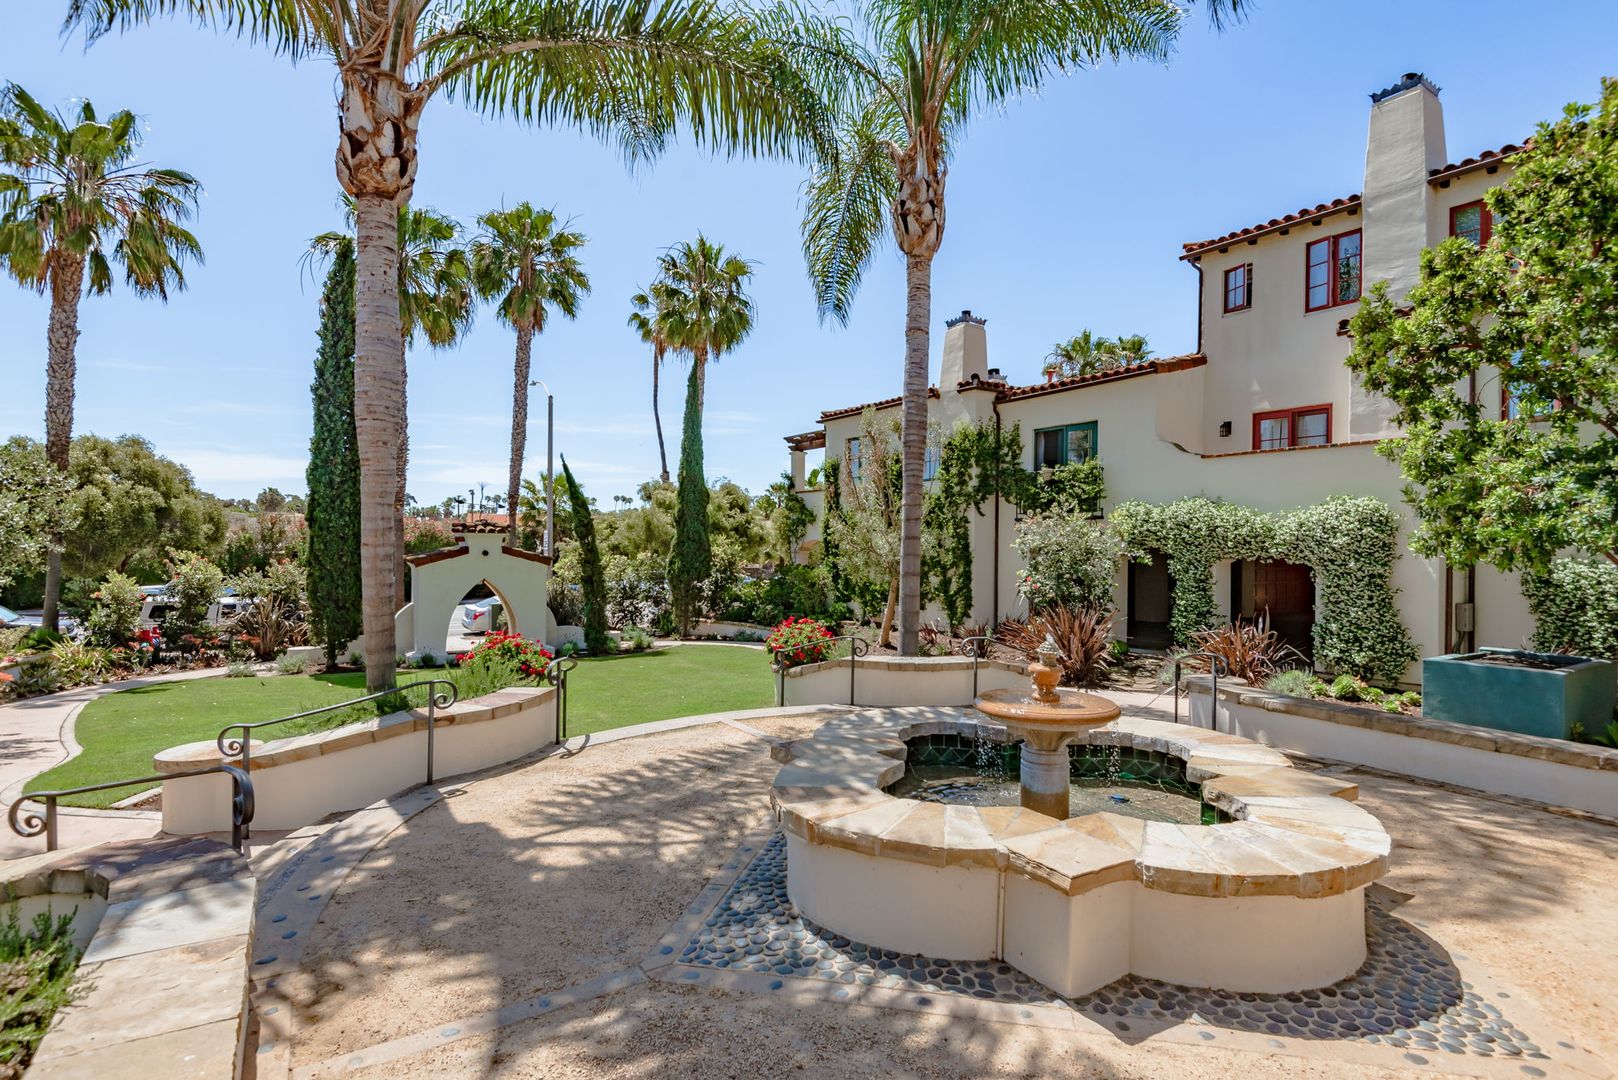 Villa Del Mar~ The Gorgeous gem in the American Riviera~ NEWLY Remodeled!